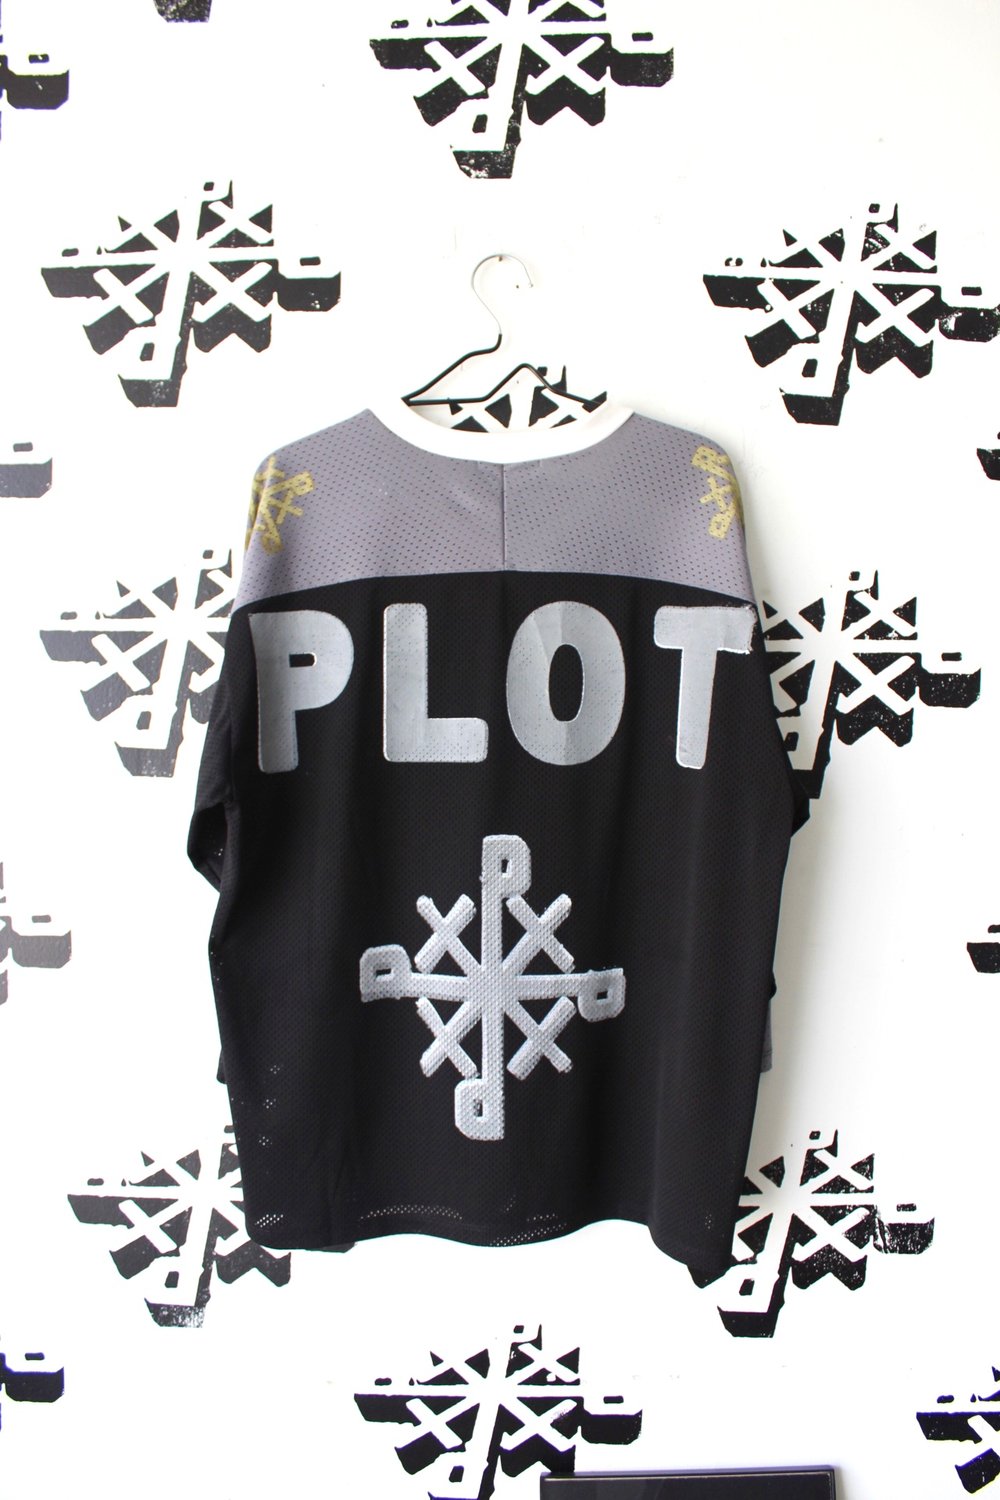 cold player hockey jersey in blk/gray/wht